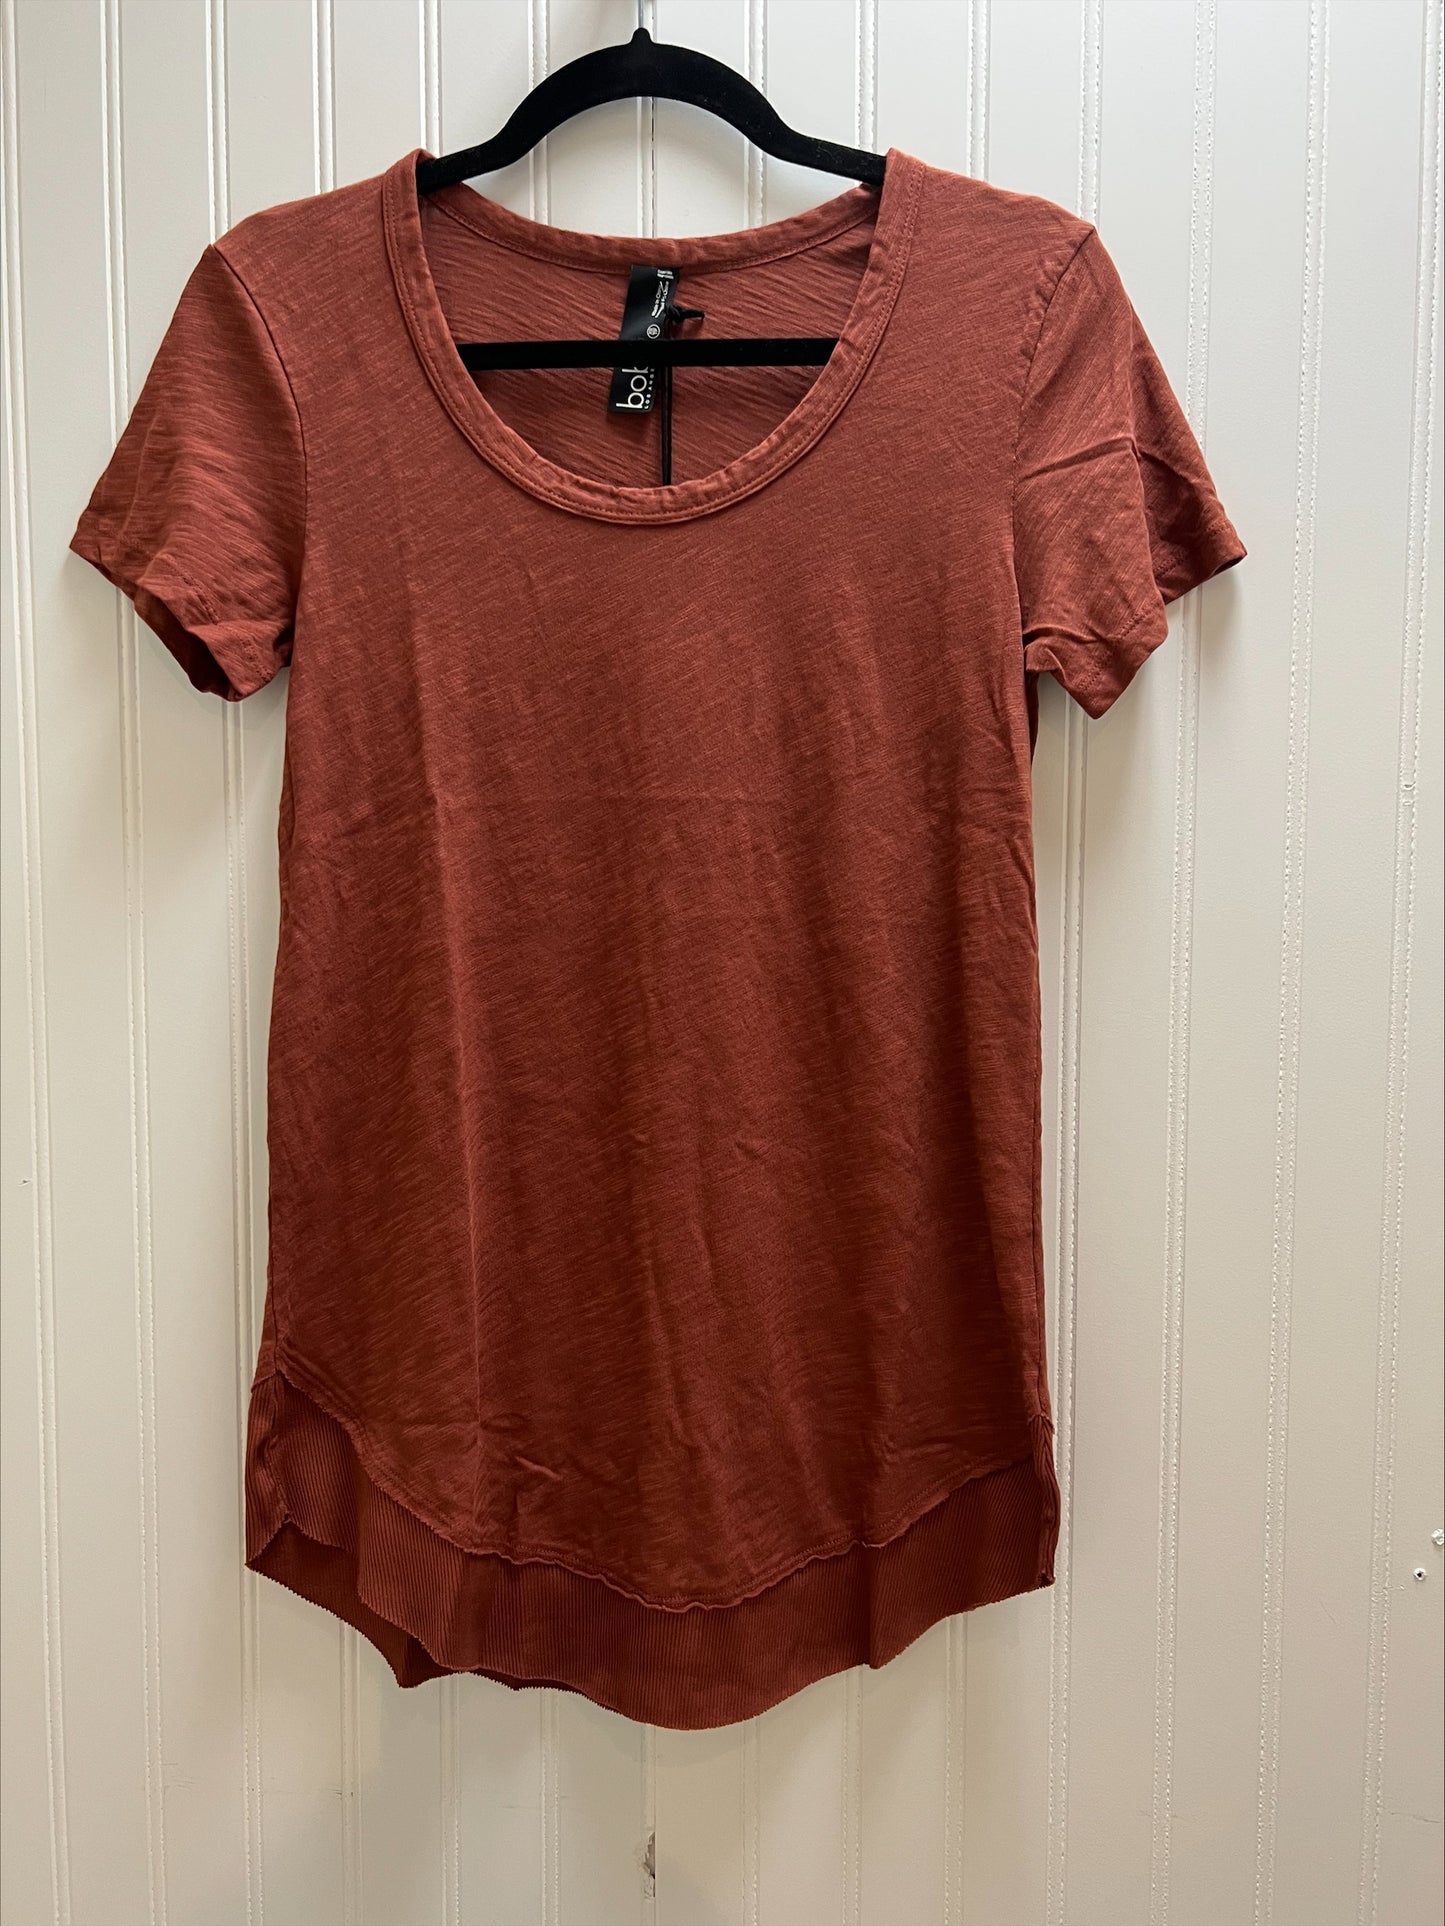 Ribbed Curved Hem T-Shirt in Rustic